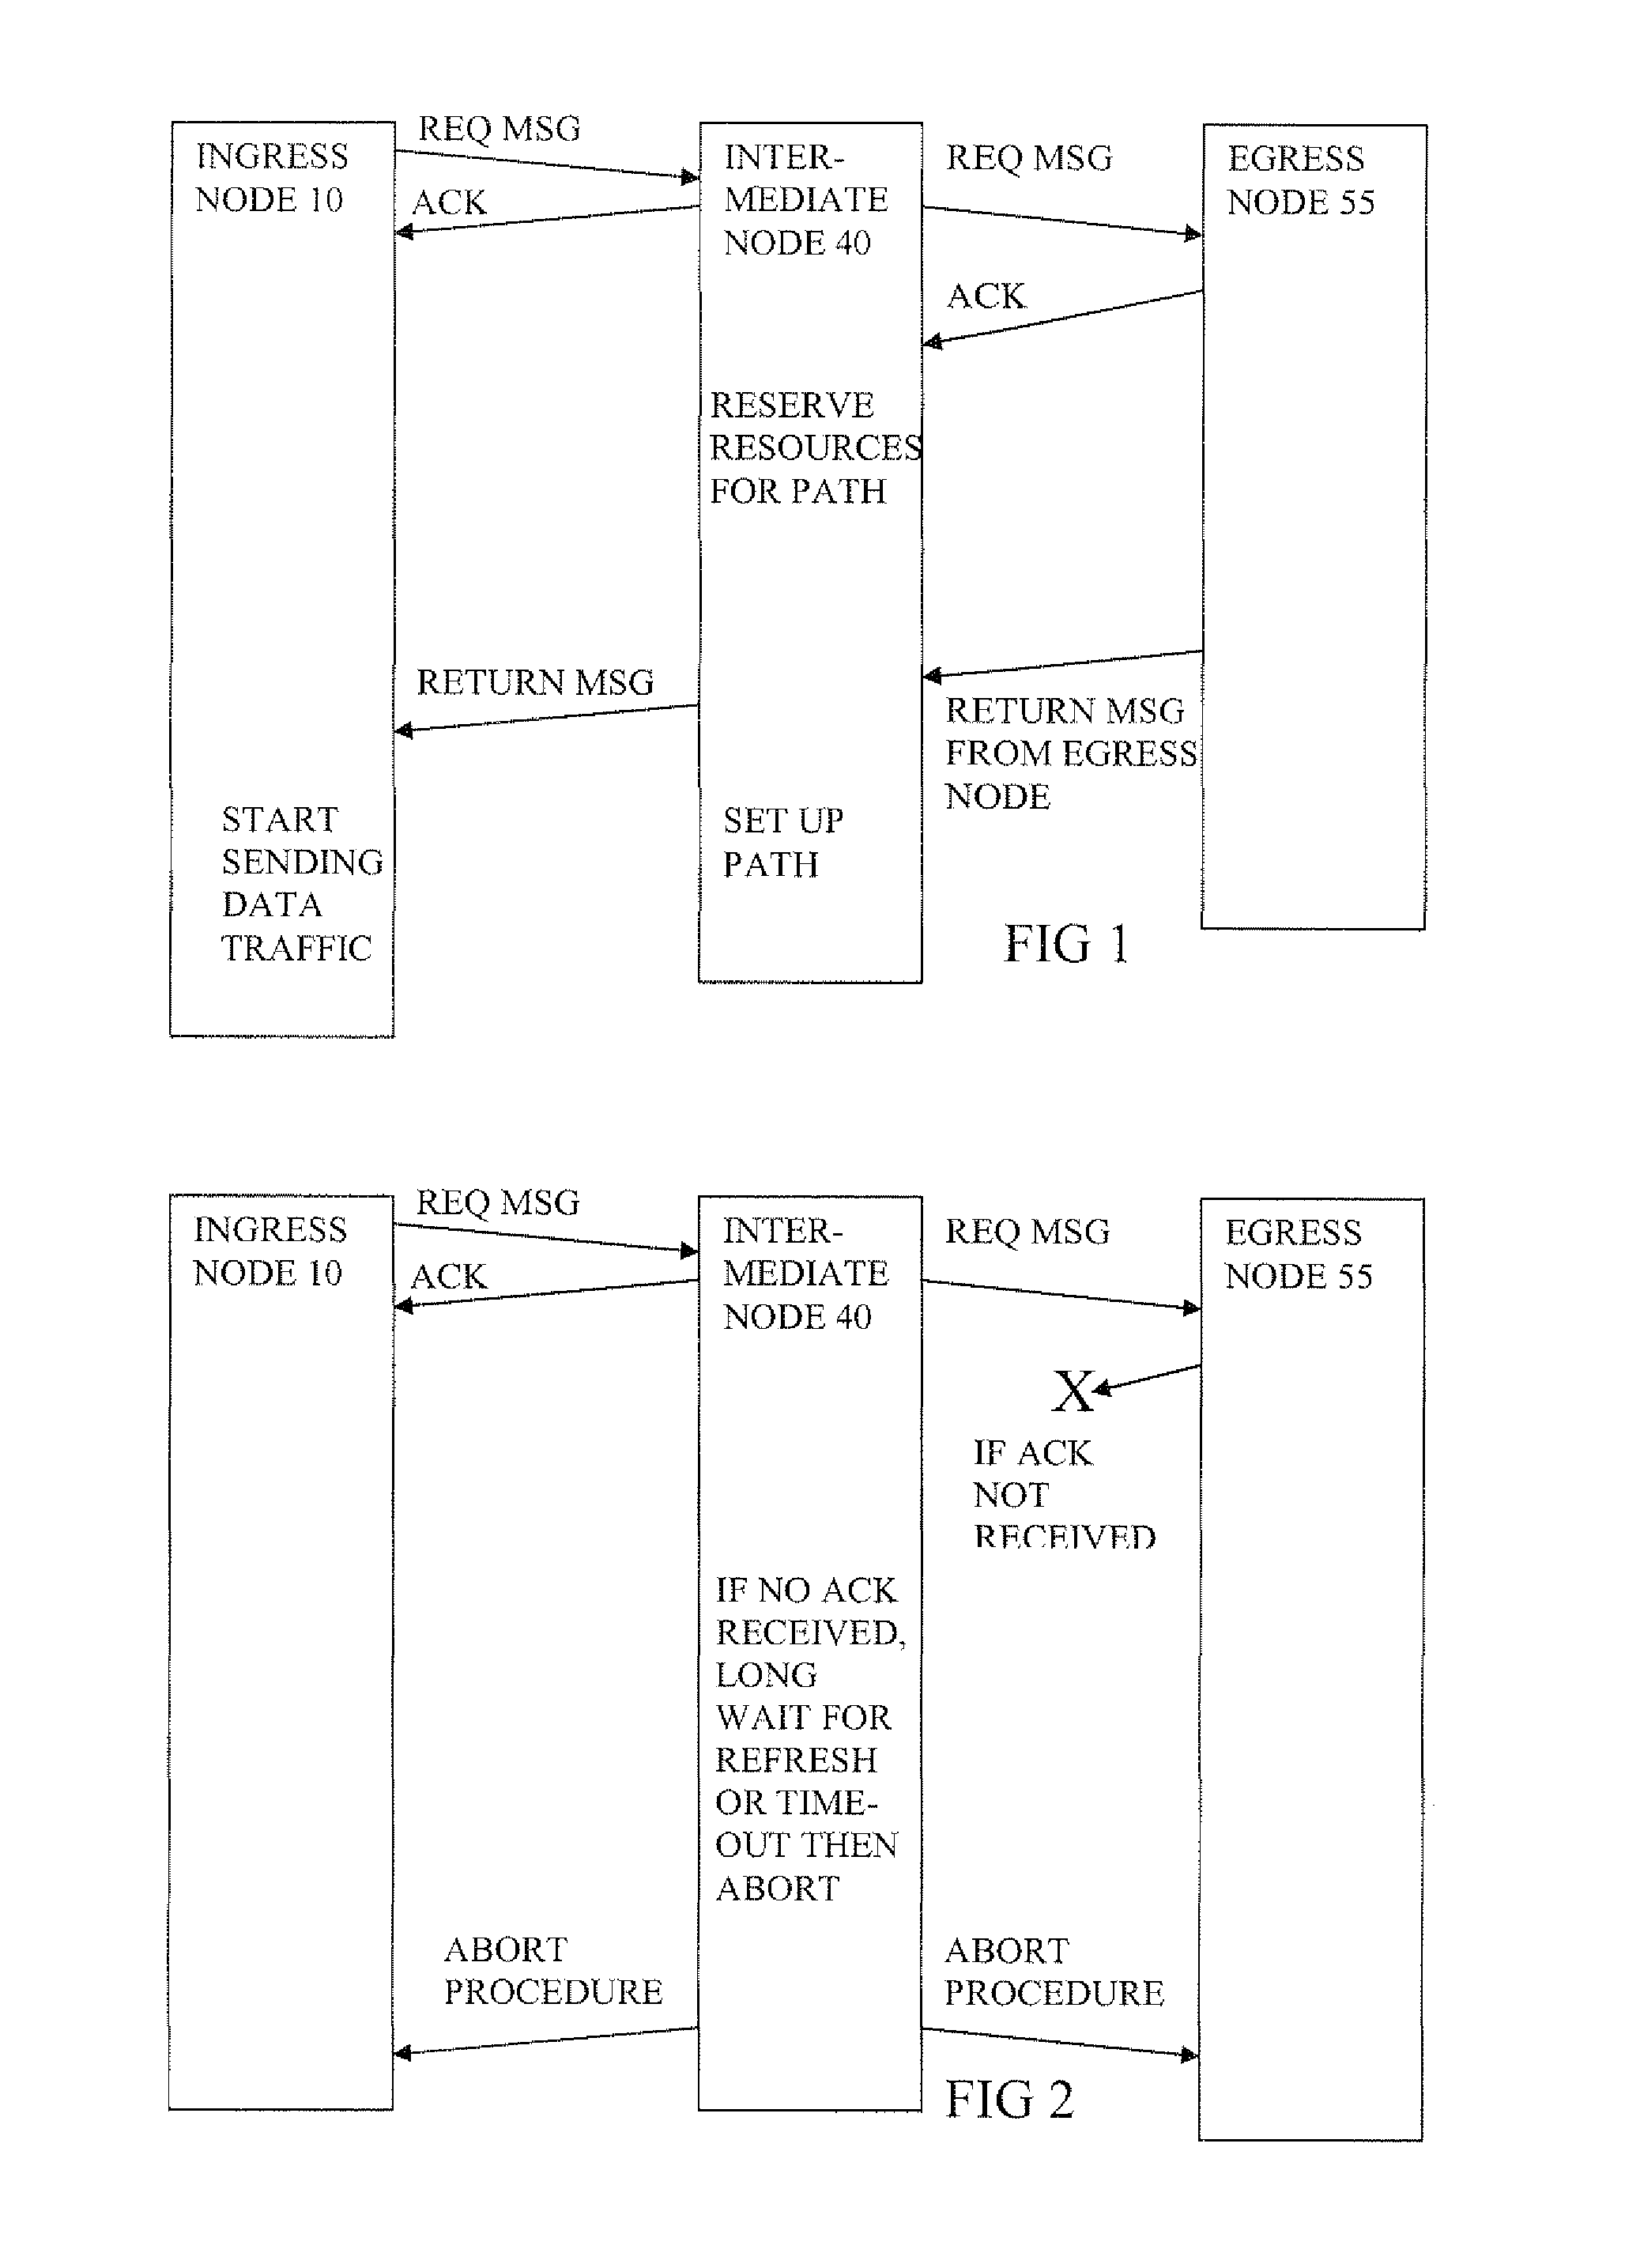 Handling failure of request message during set up of label switched path